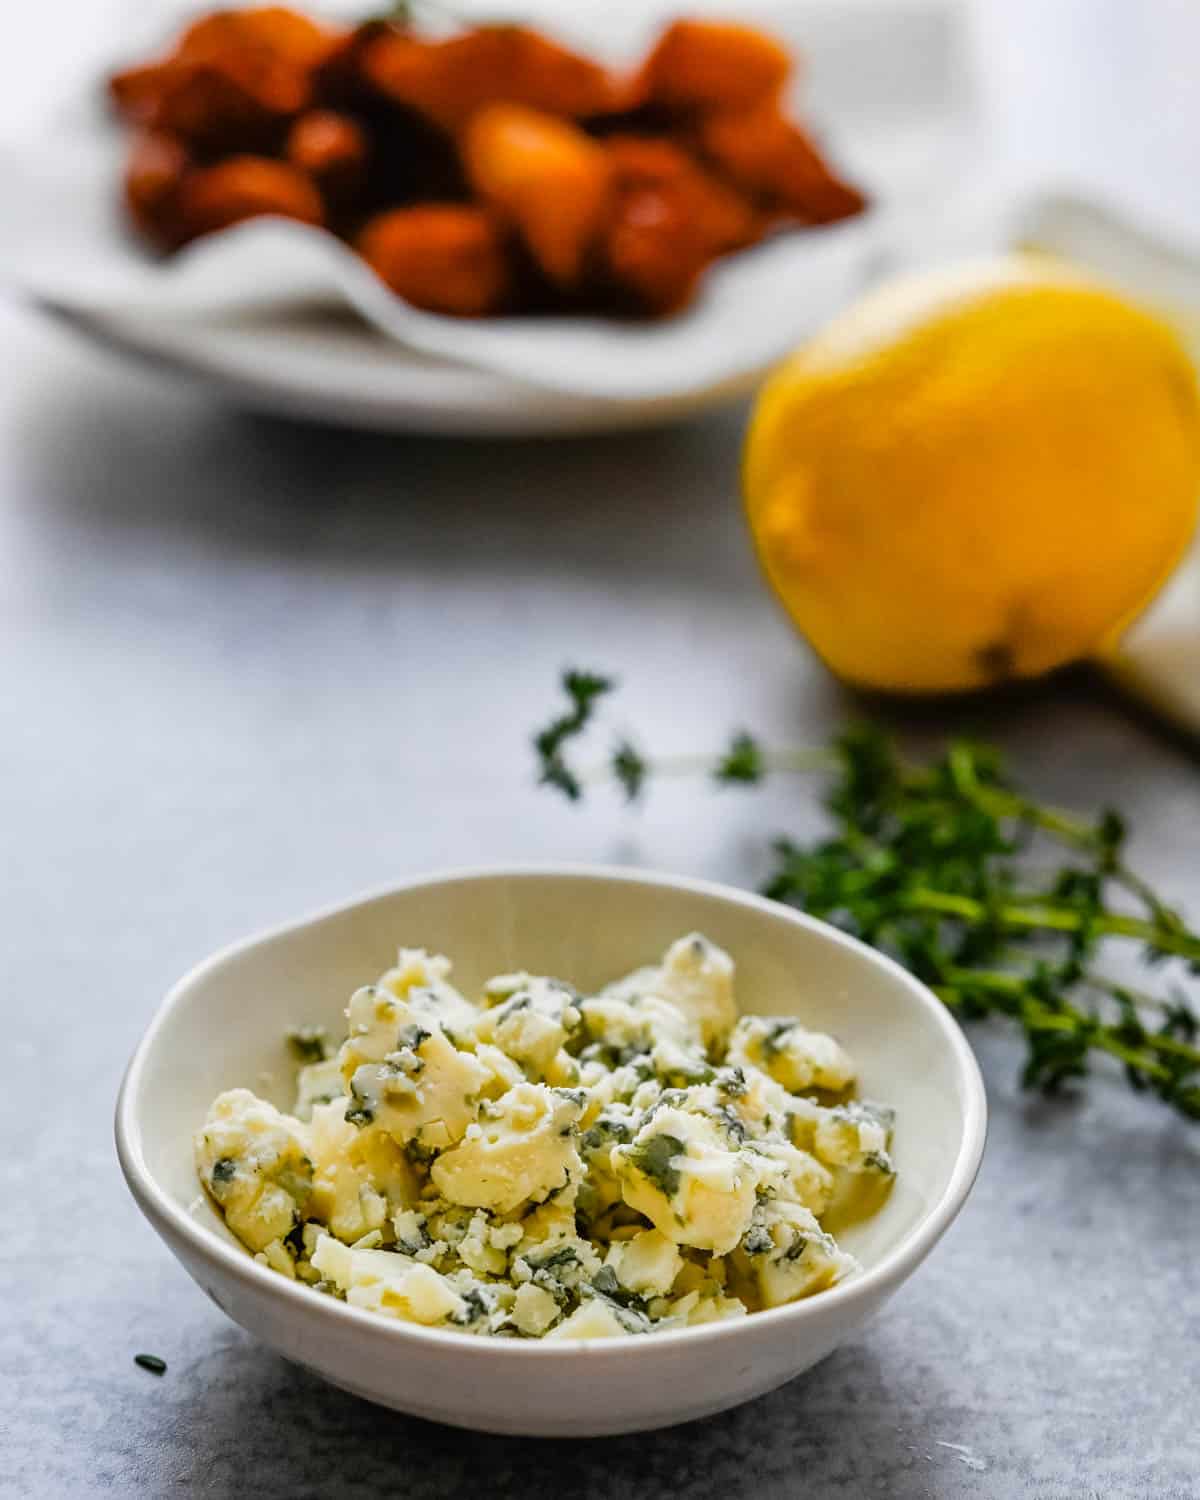 crumbled blue cheese, thyme and lemon to garnish the fried gnocchi.